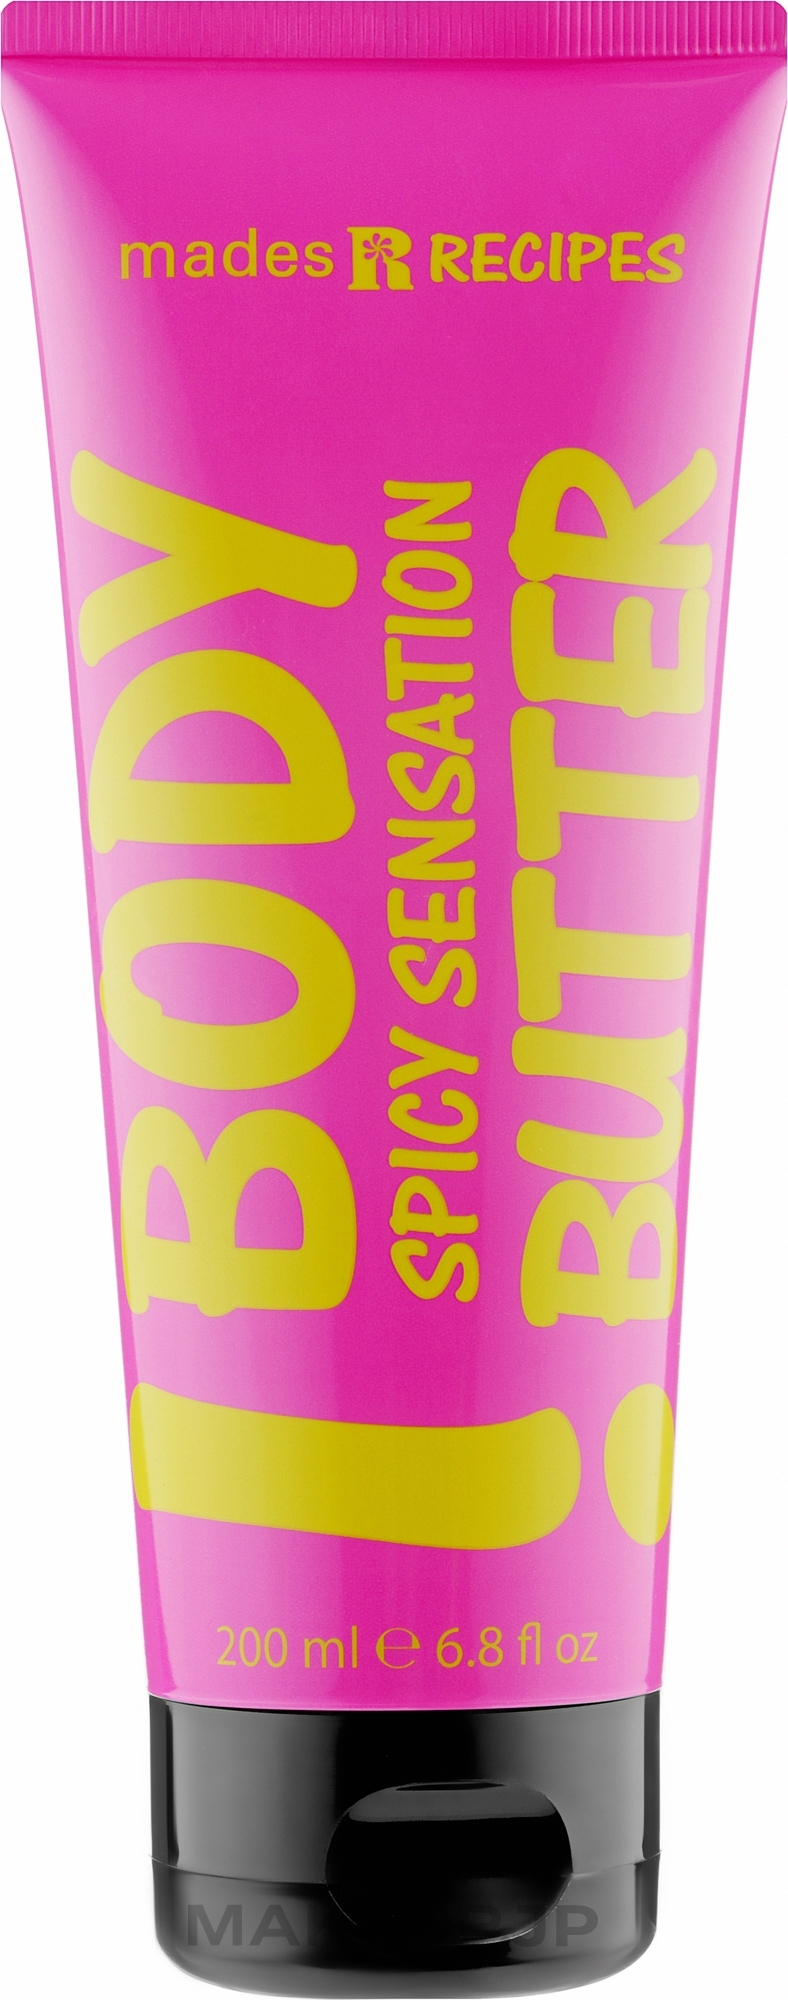 Spicy Sensation Body Butter - Mades Cosmetics Recipes Spicy Sensation Body Butter — photo 200 ml